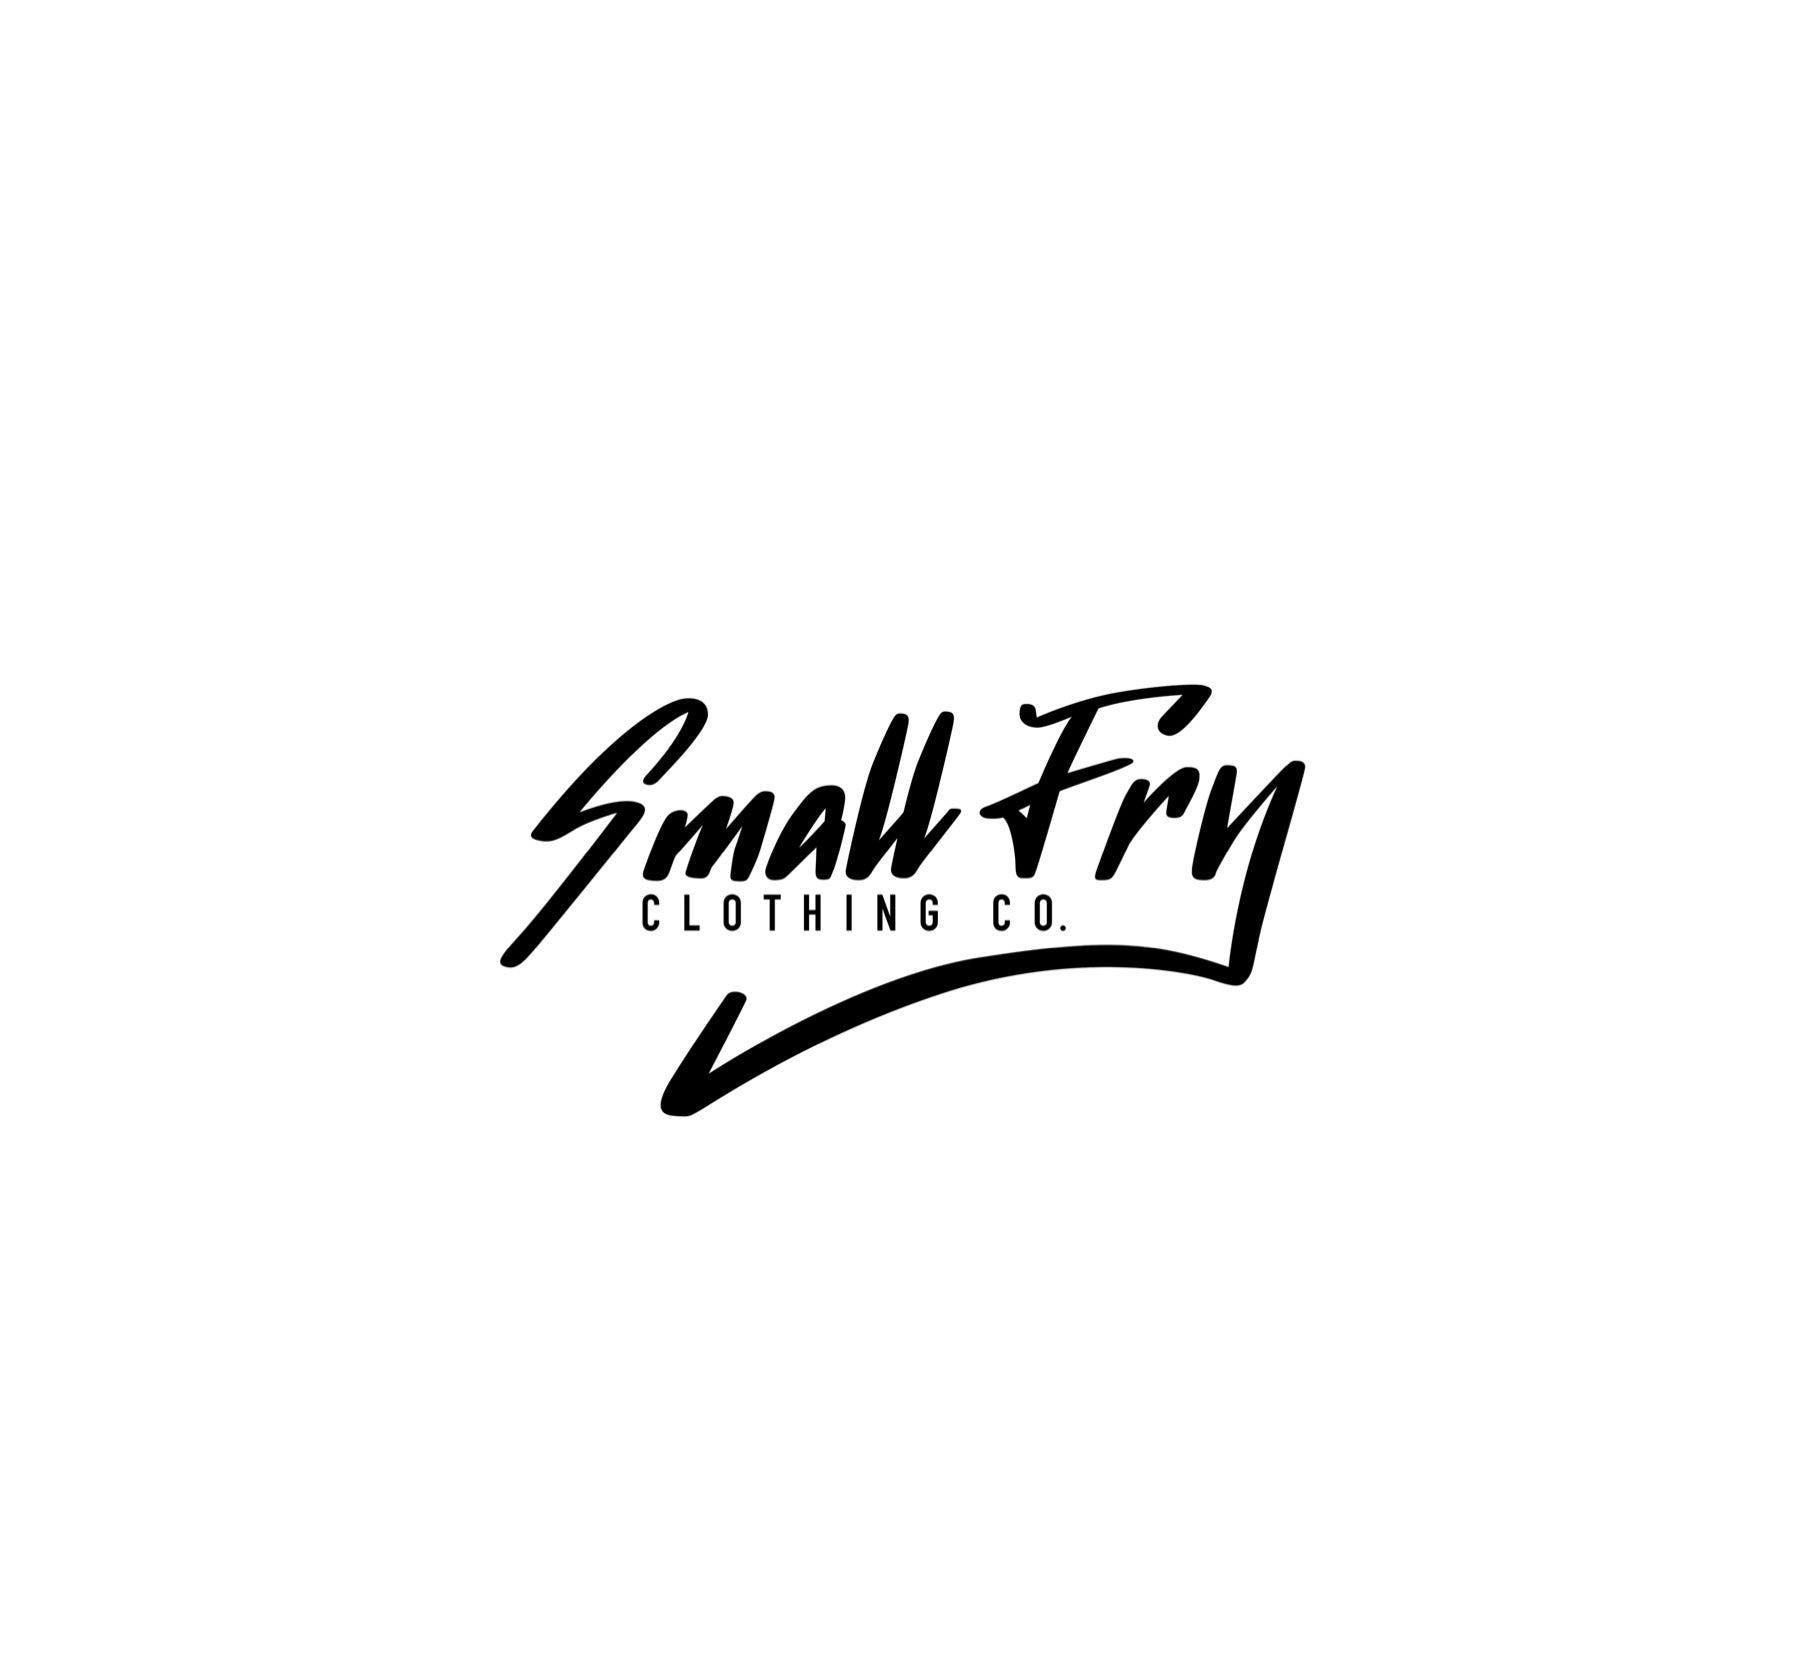 Small Fry Clothing Co.